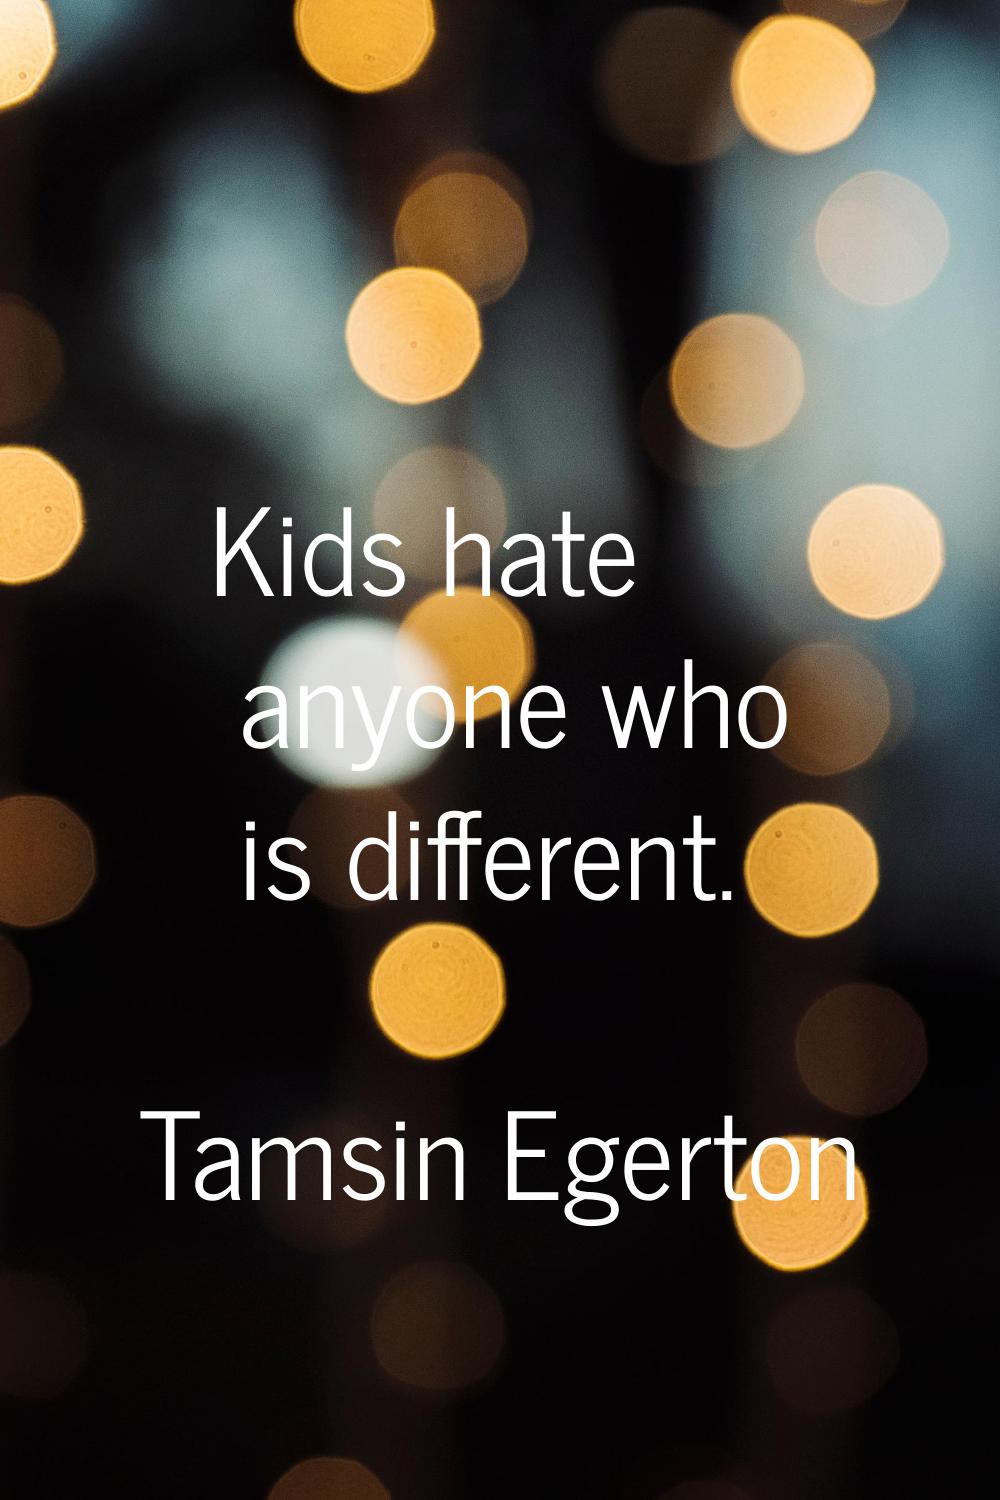 Kids hate anyone who is different.